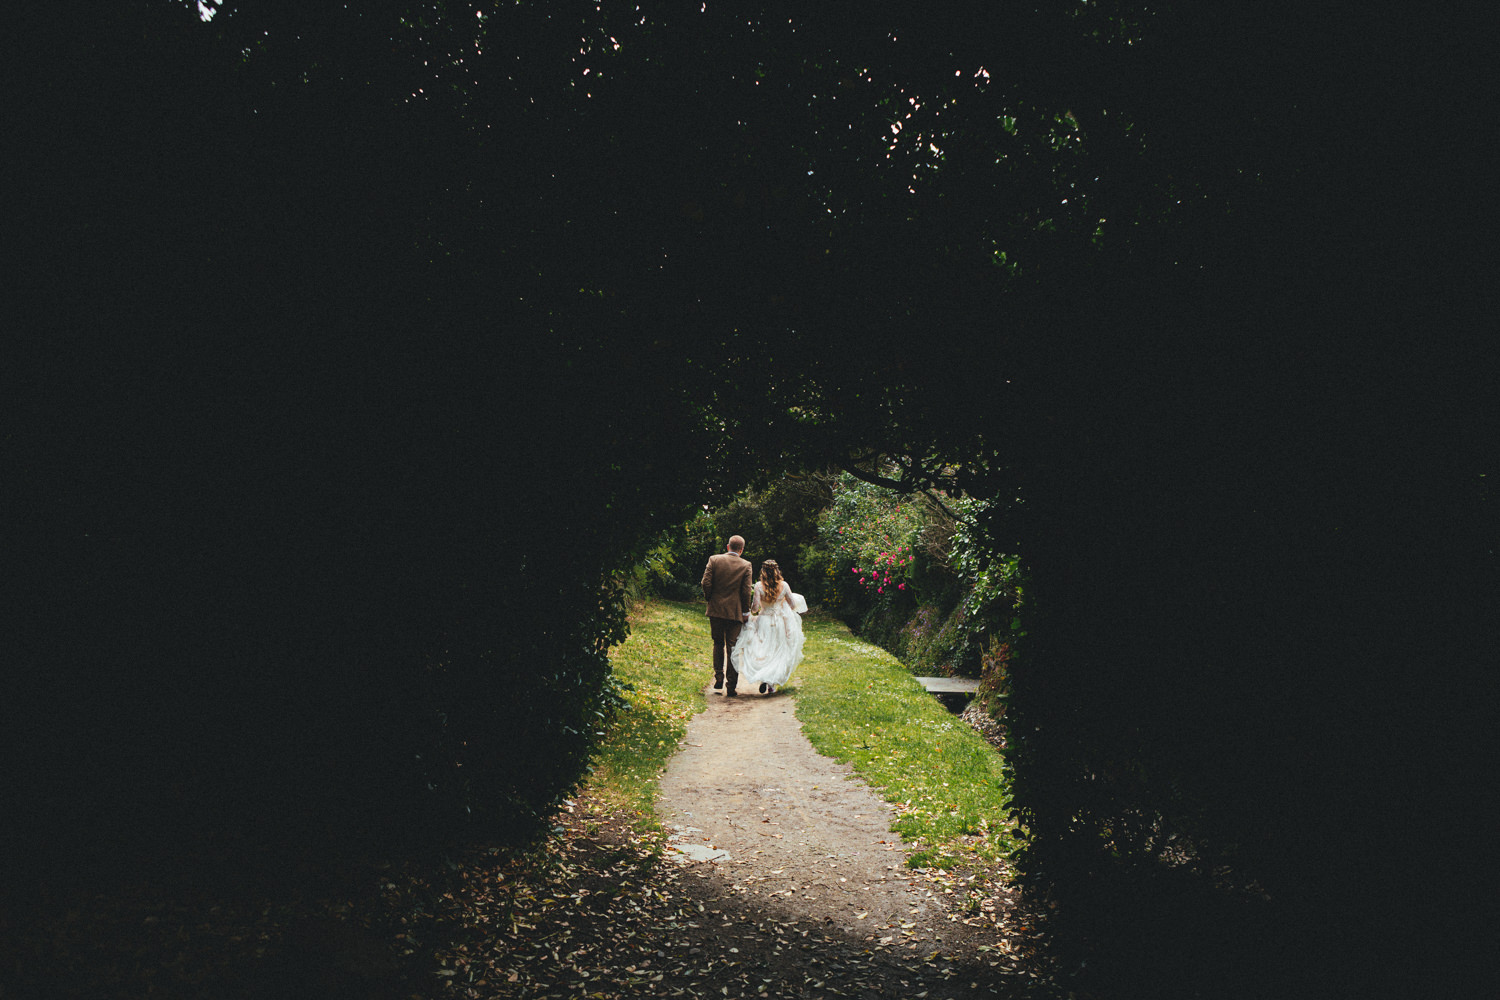 Bride on her way to the church. Bride walking. Pathway. Archway. Cornish Tipi Wedding Photographer. Wedding Photography at Cornish Tipi Weddings on the coast of North Cornwall. Cornish Tipi Wedding is set in a wooded valley, surrounded by ancient woodlands